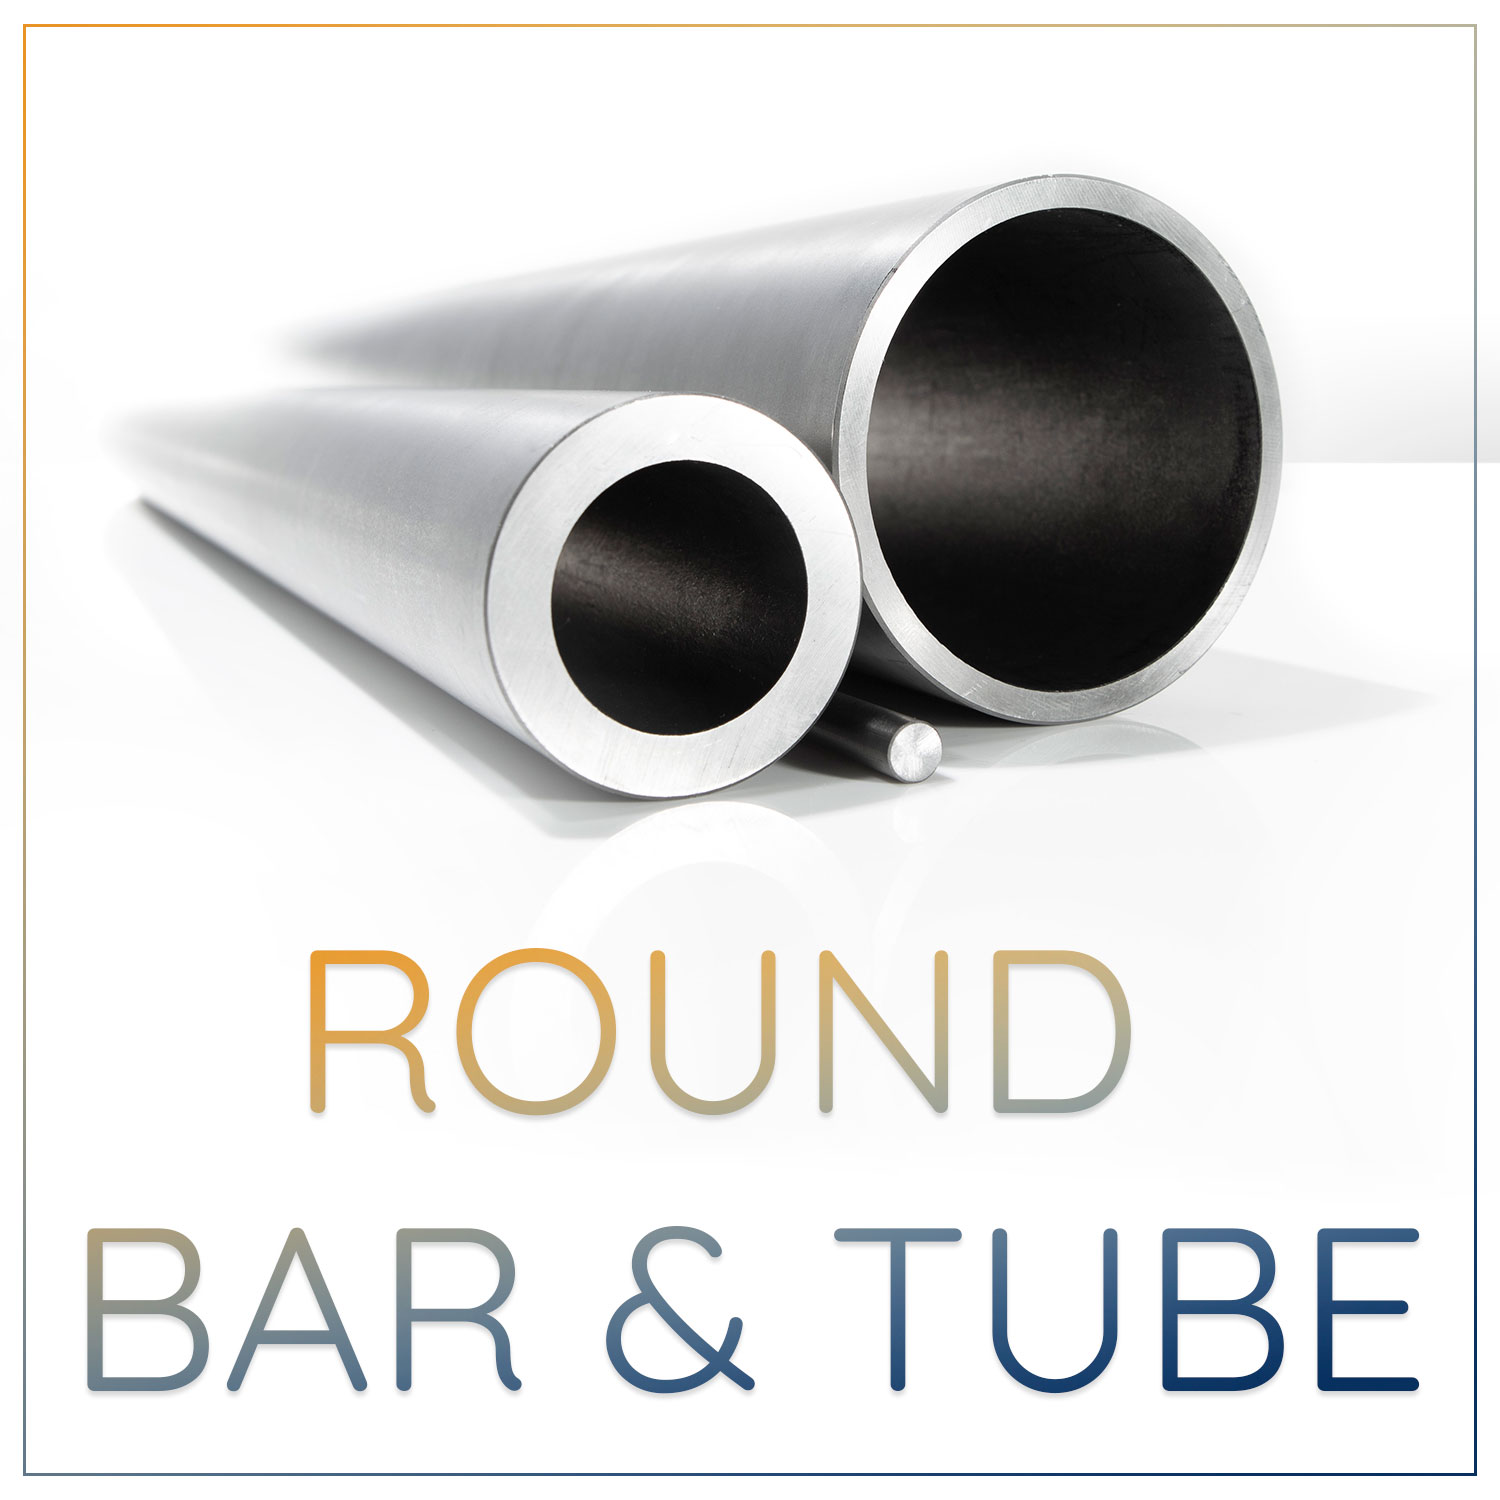 Negative CTE Round bar and Tube shown with an image of three tubes and bars in a stylized format.